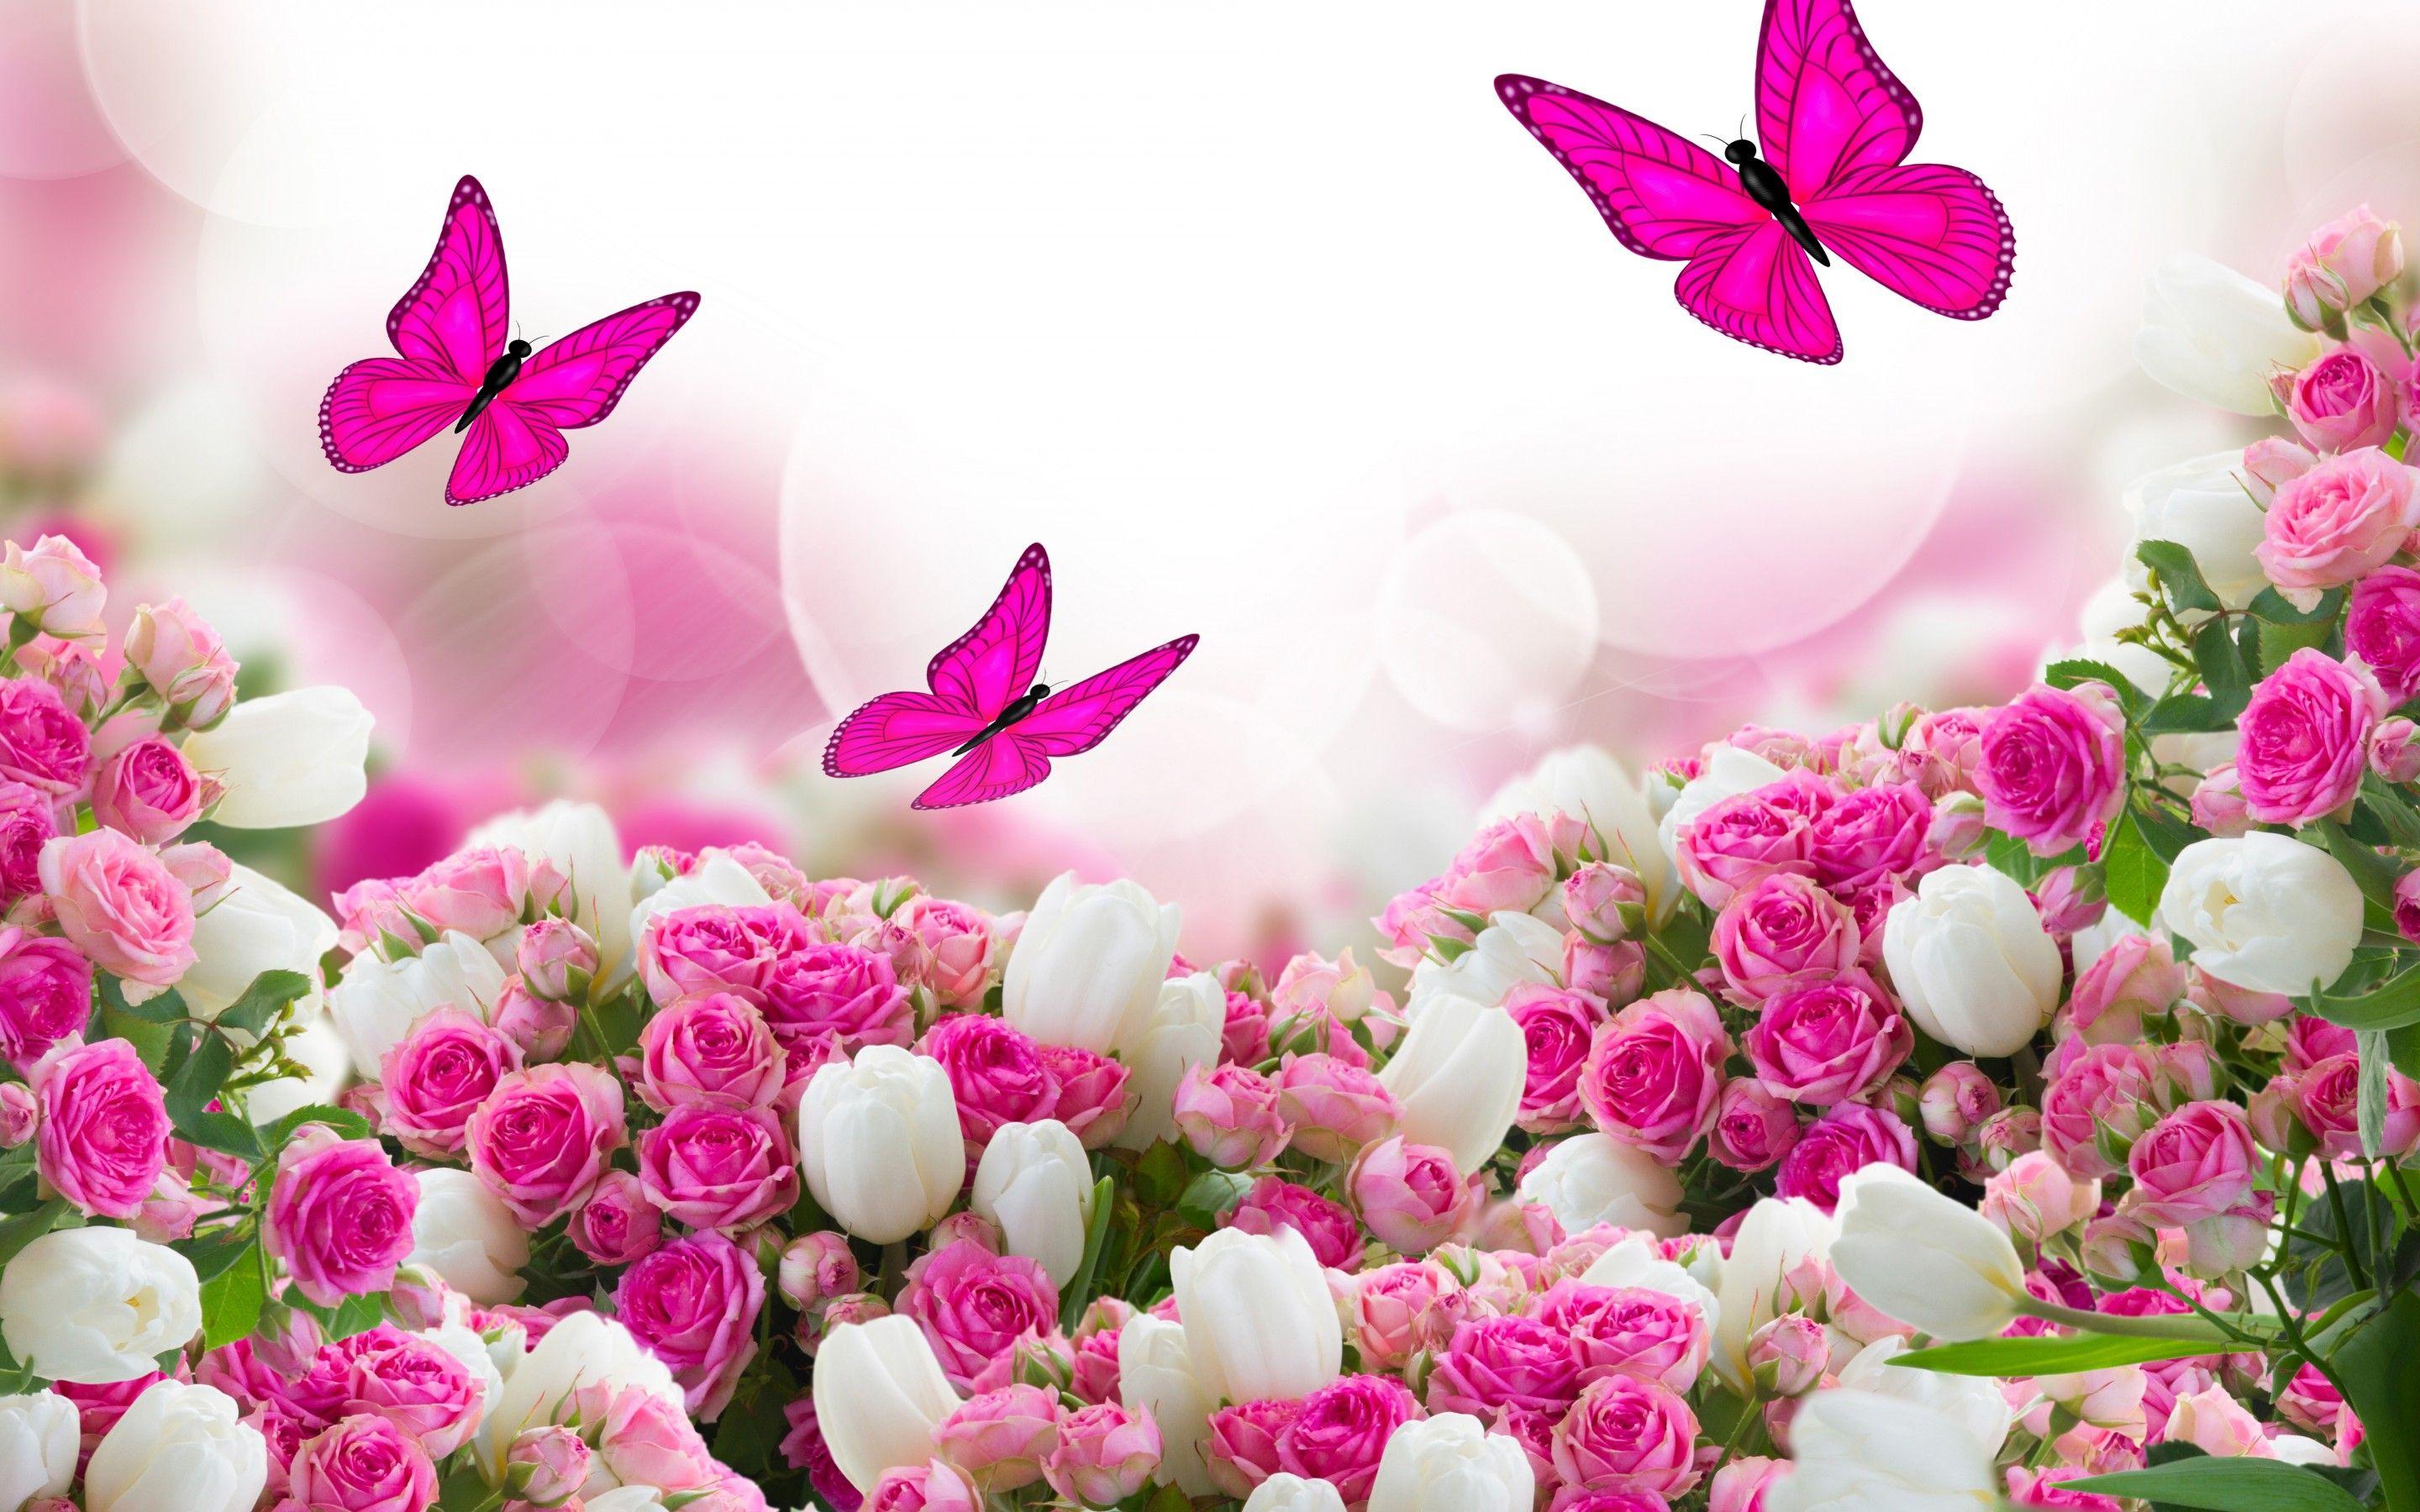 Pink Rose Flowers Image HD Pics Widescreen Roses Of Mobile